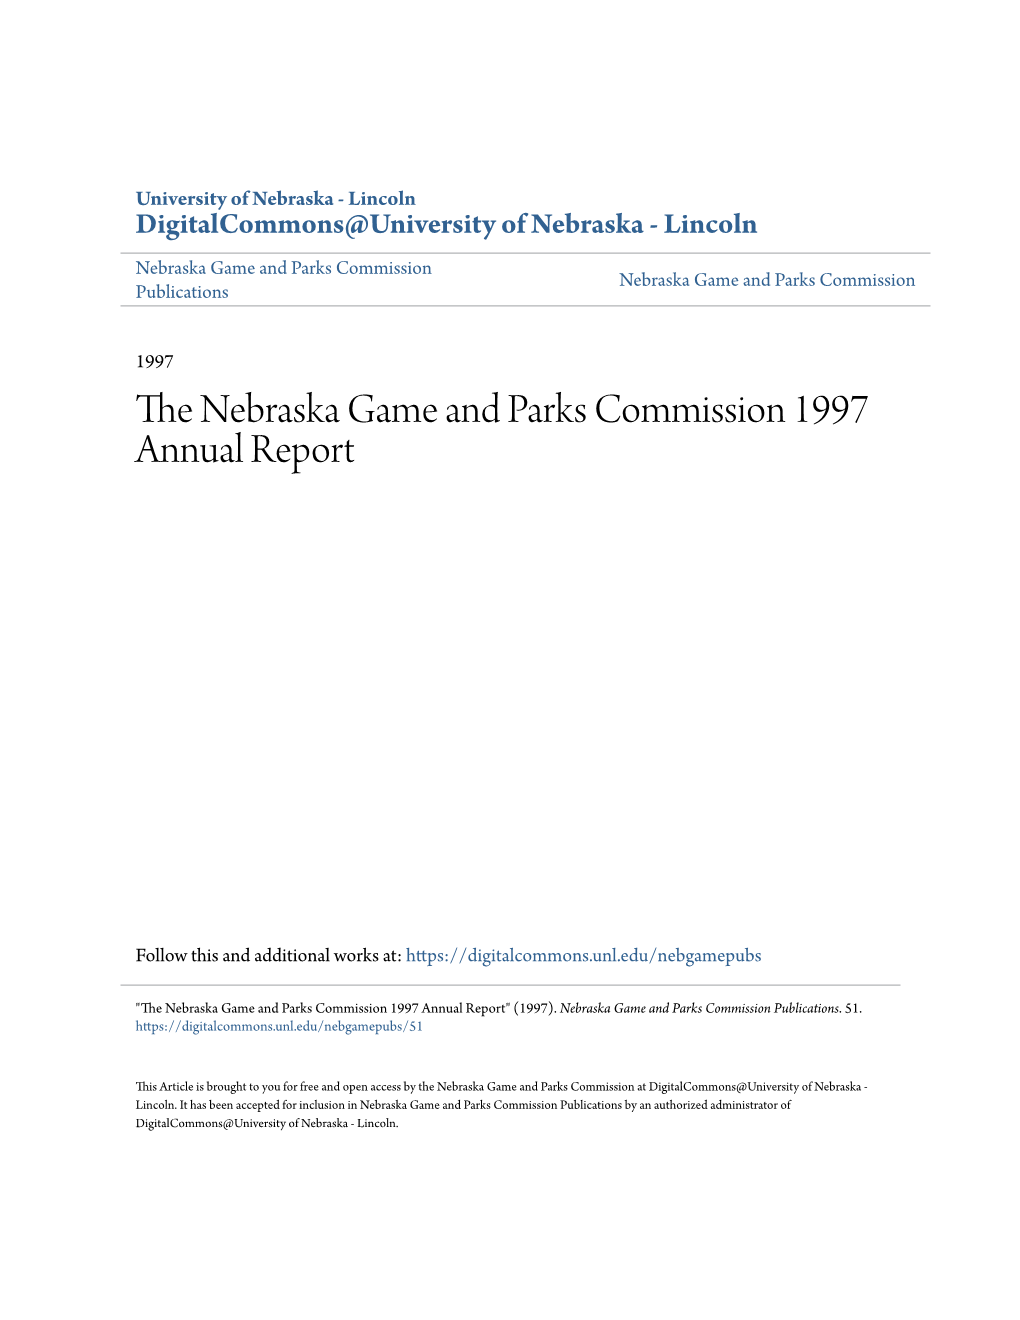 The Nebraska Game and Parks Commission 1997 Annual Report